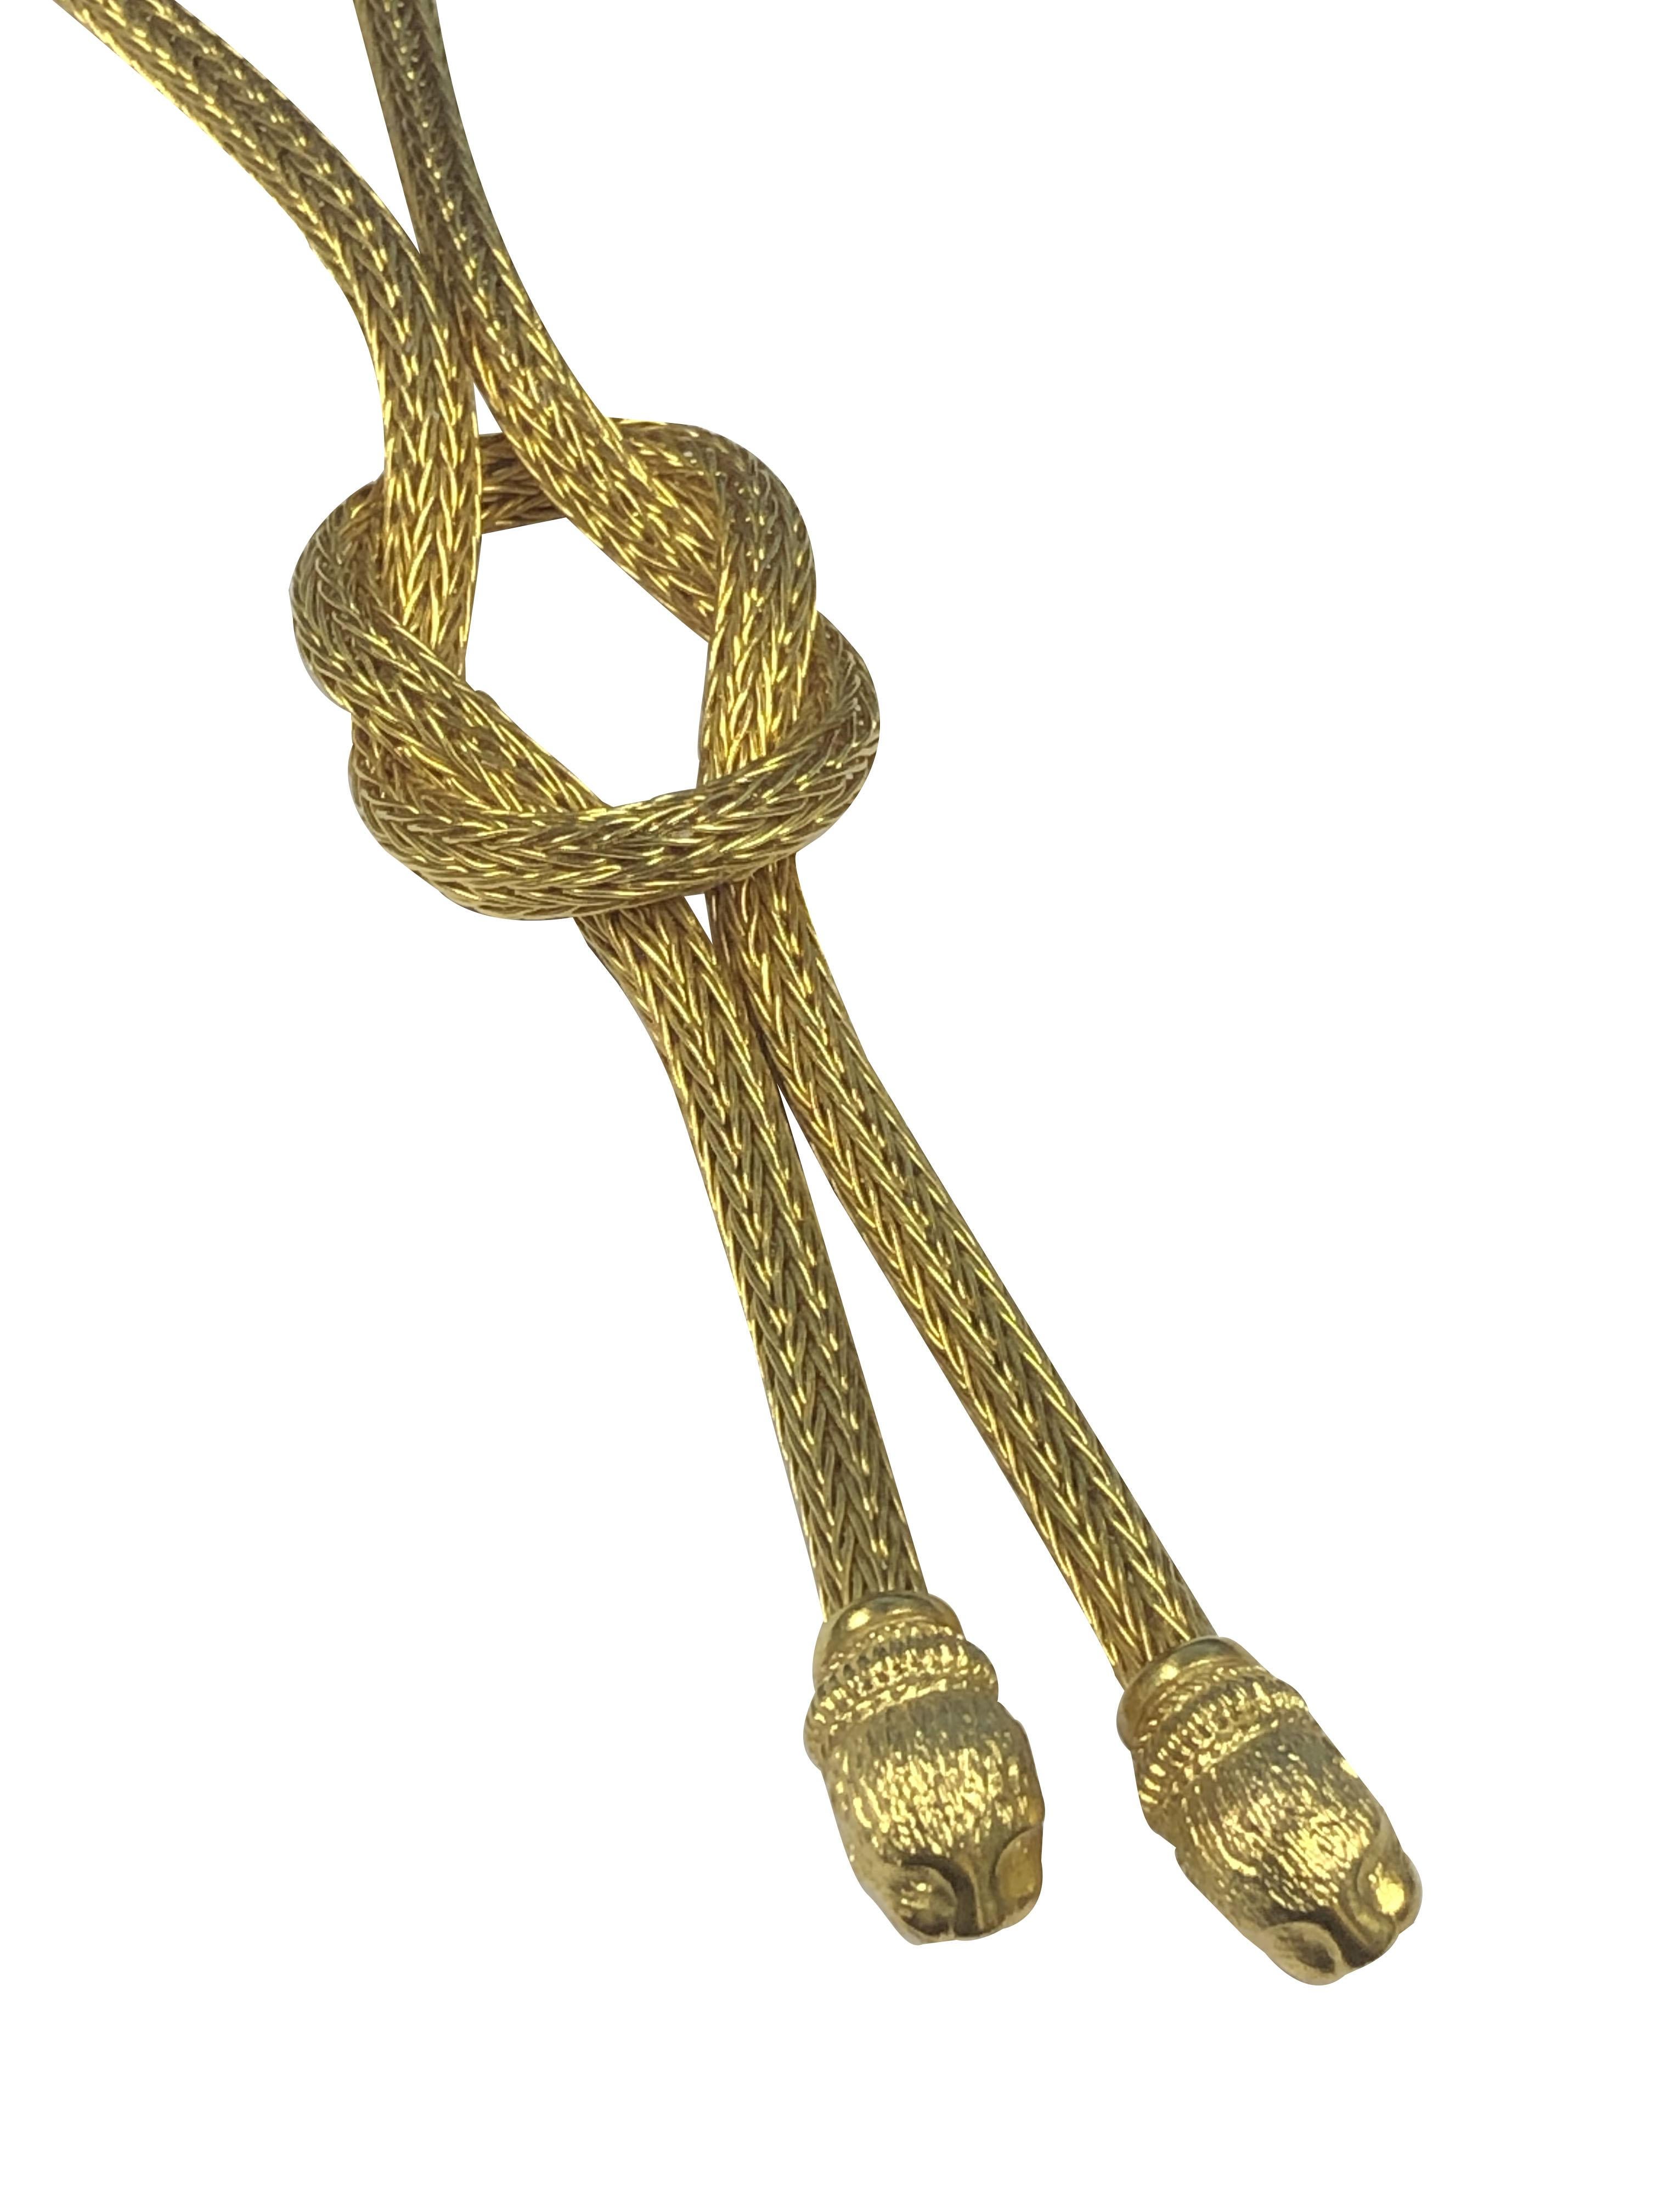 Circa 2000 Ilias Lalaounis of Greece 18K Yellow Gold Chimera Lariat Necklace, measuring 24 inches in length with the Round woven chain being 3/16 inch in Diameter and  the piece weighing a total of 65 Grams. The Chimera Head end pieces are nicely